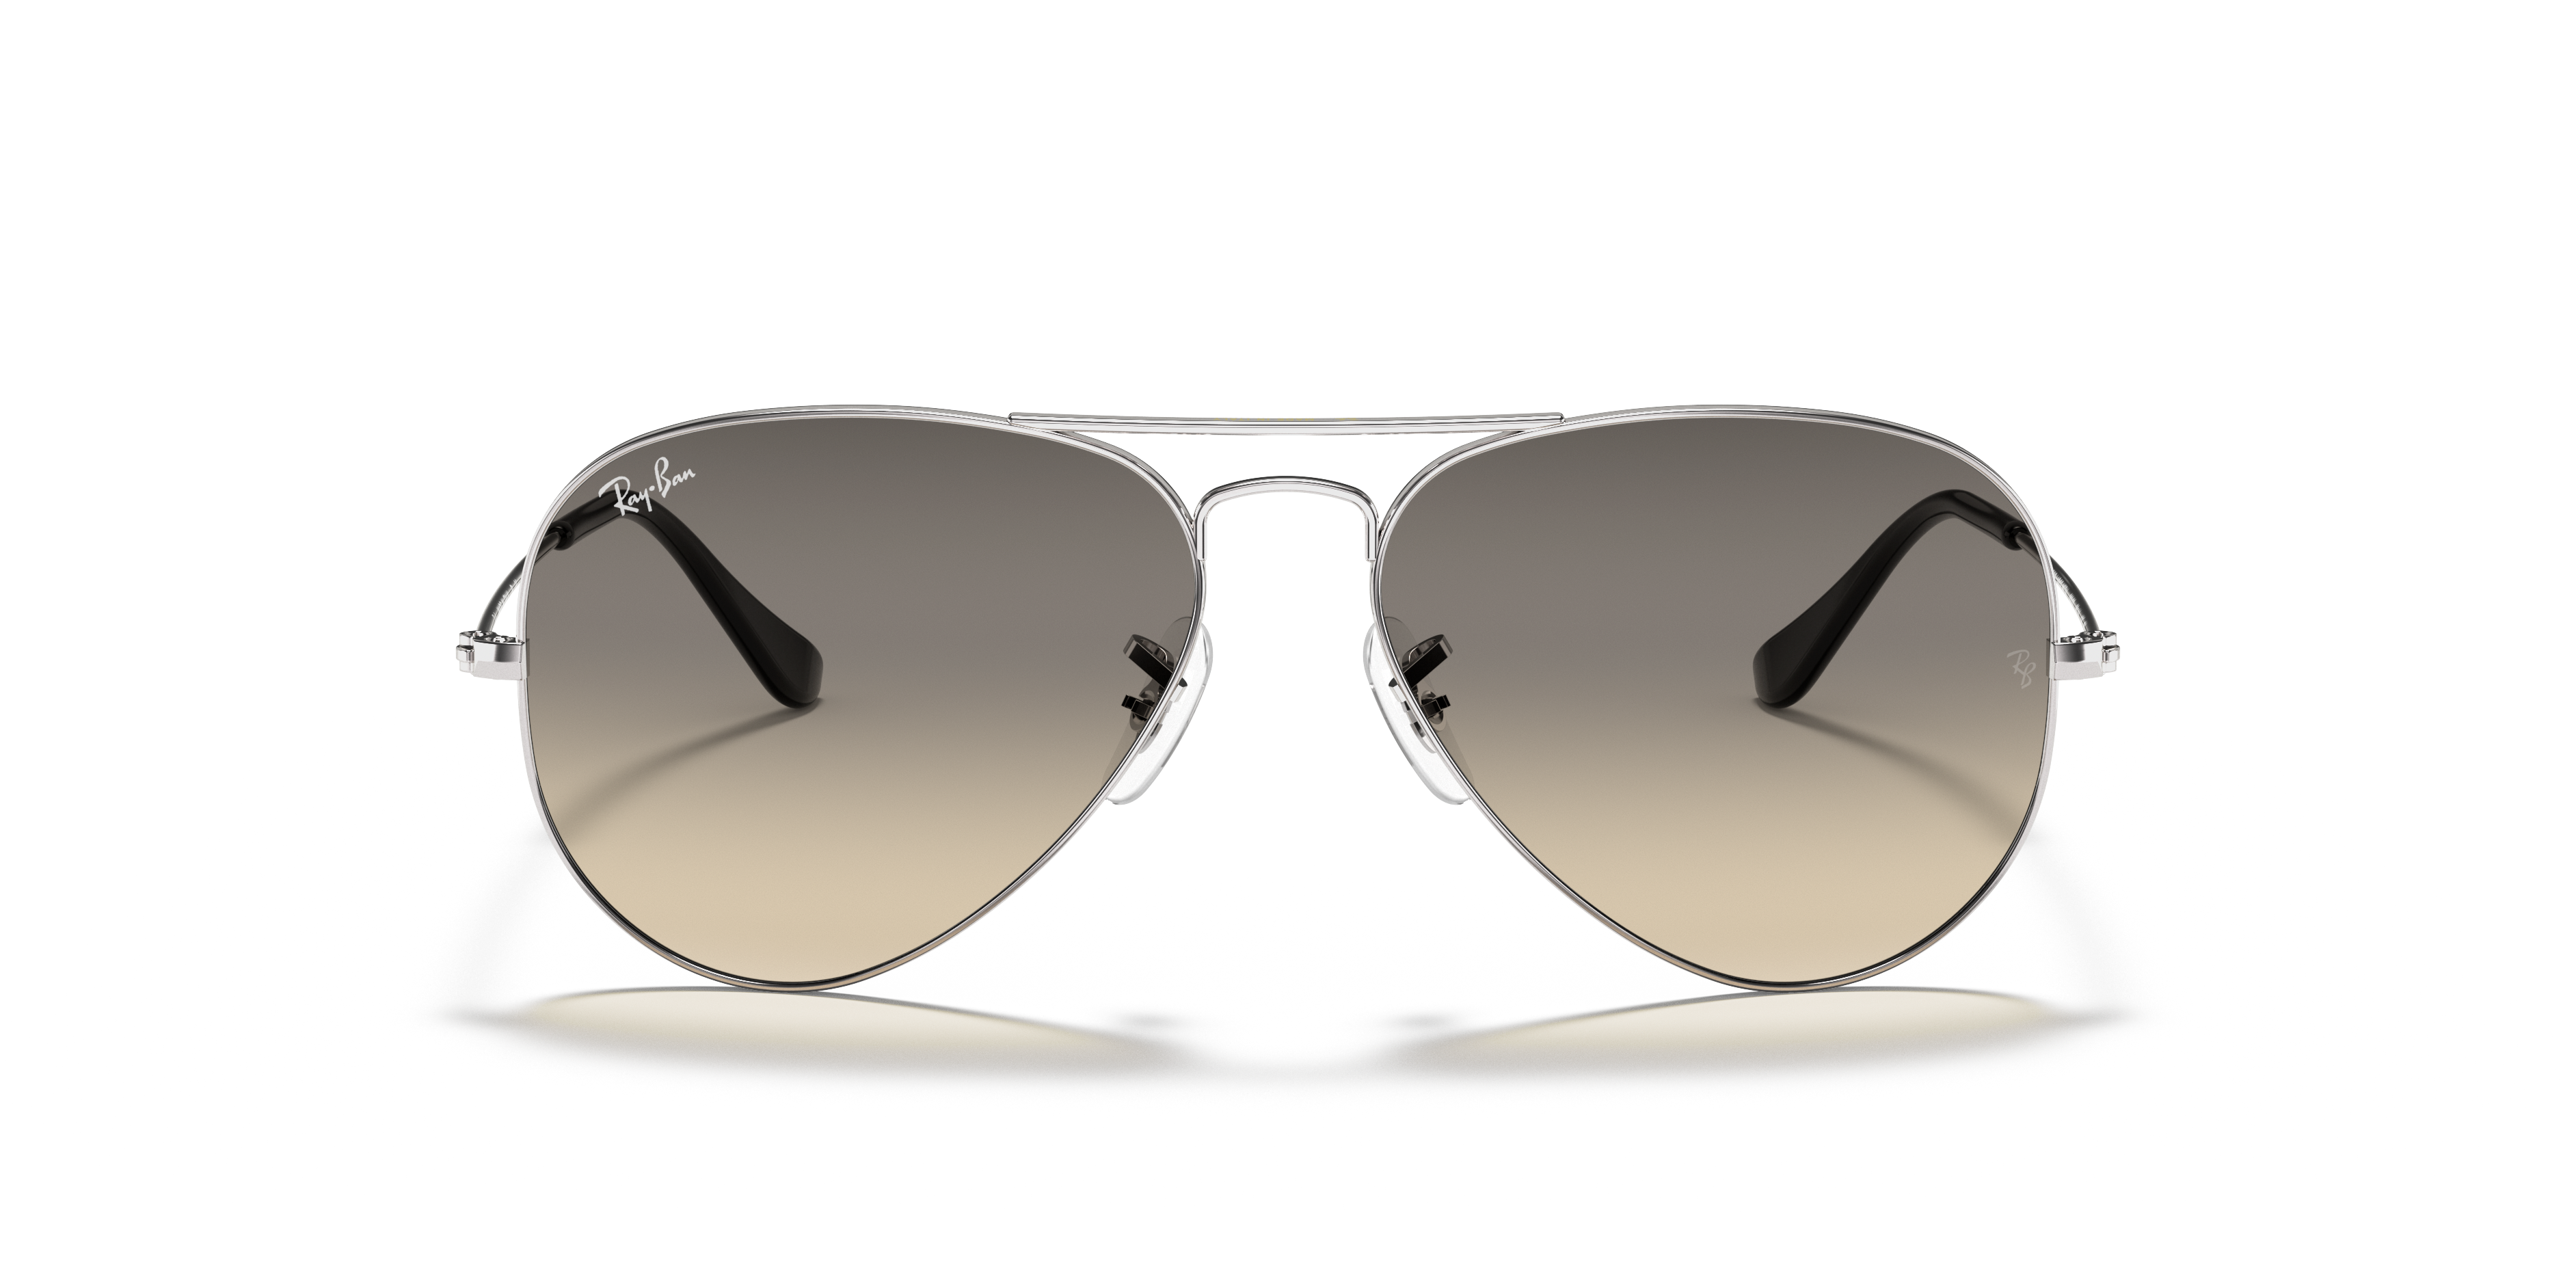 [products.image.front] Ray-Ban Aviator Gradient RB3025 003/32